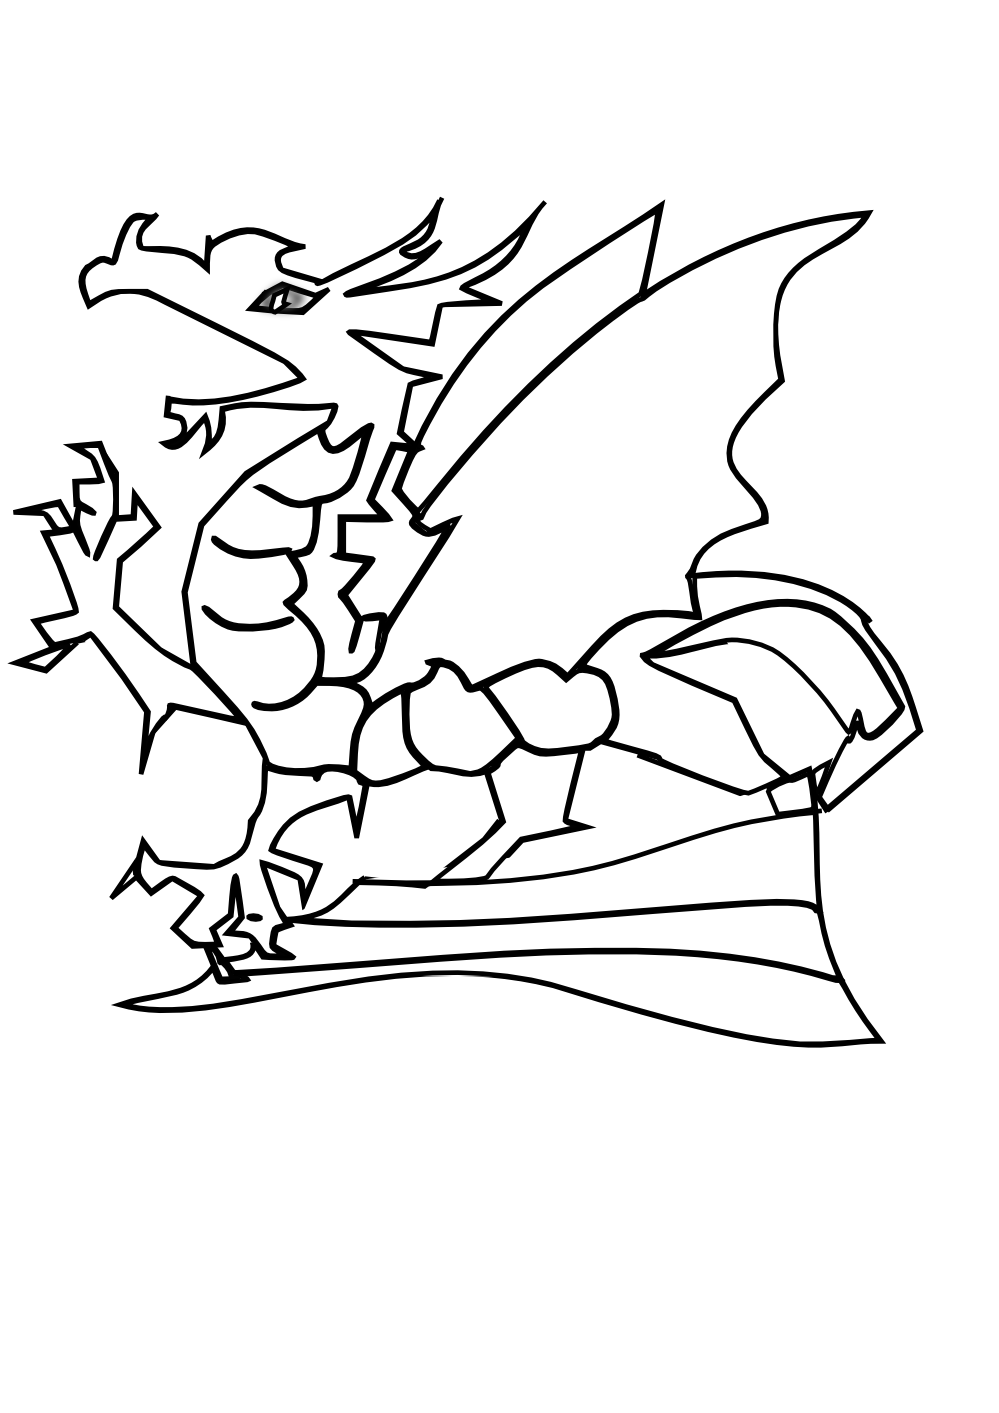 Dragon Black And White - ClipArt Best